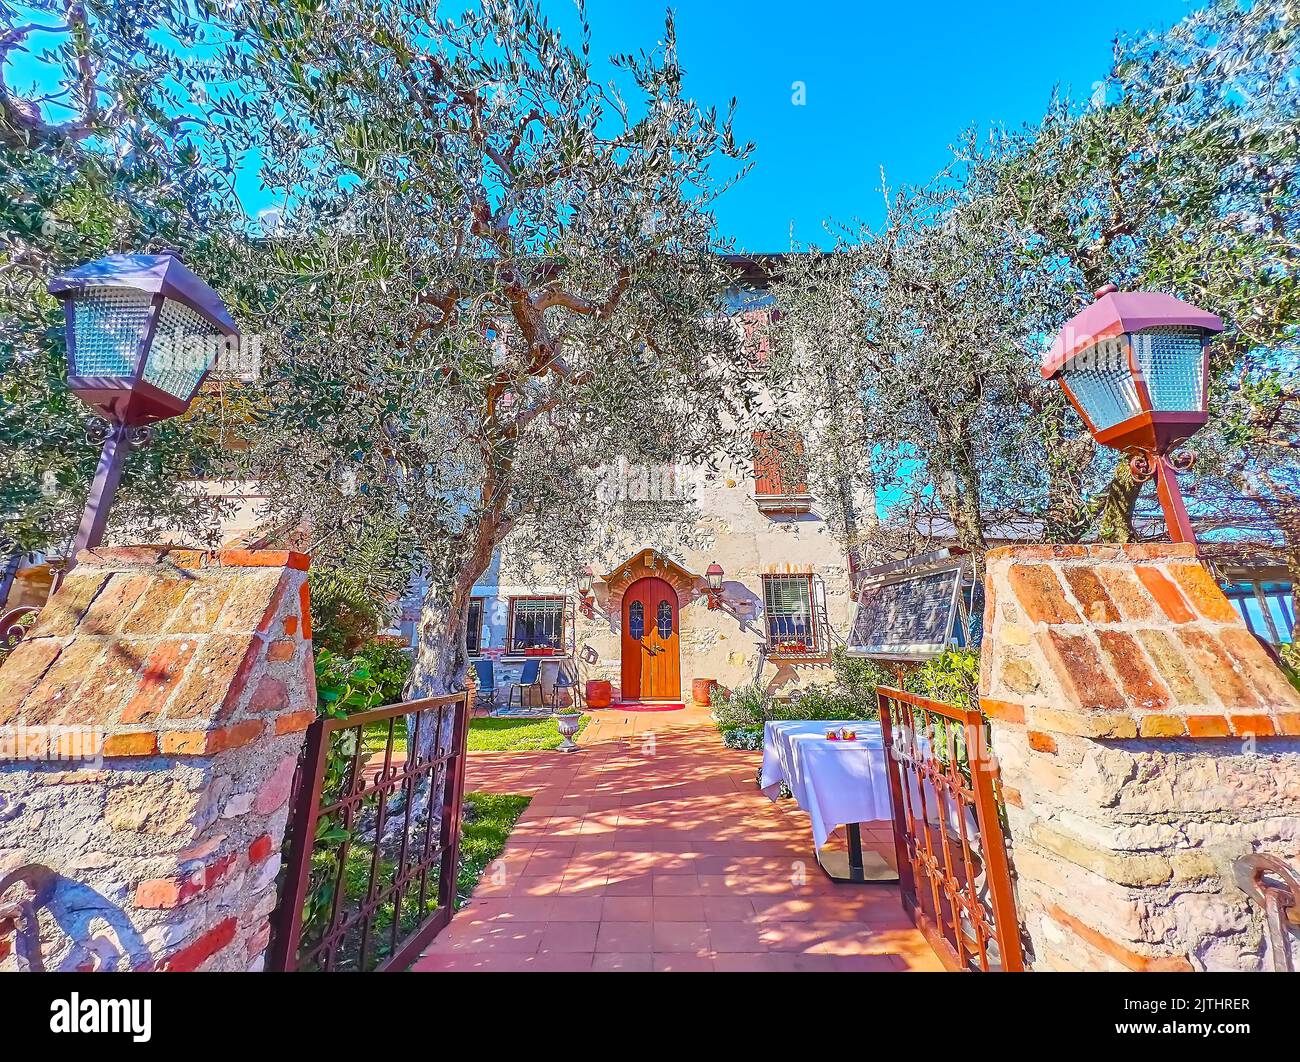 The cozy rustic style outdoor restaurant in a shady olive orchard in front of historic house, Sirmione, Italy Stock Photo